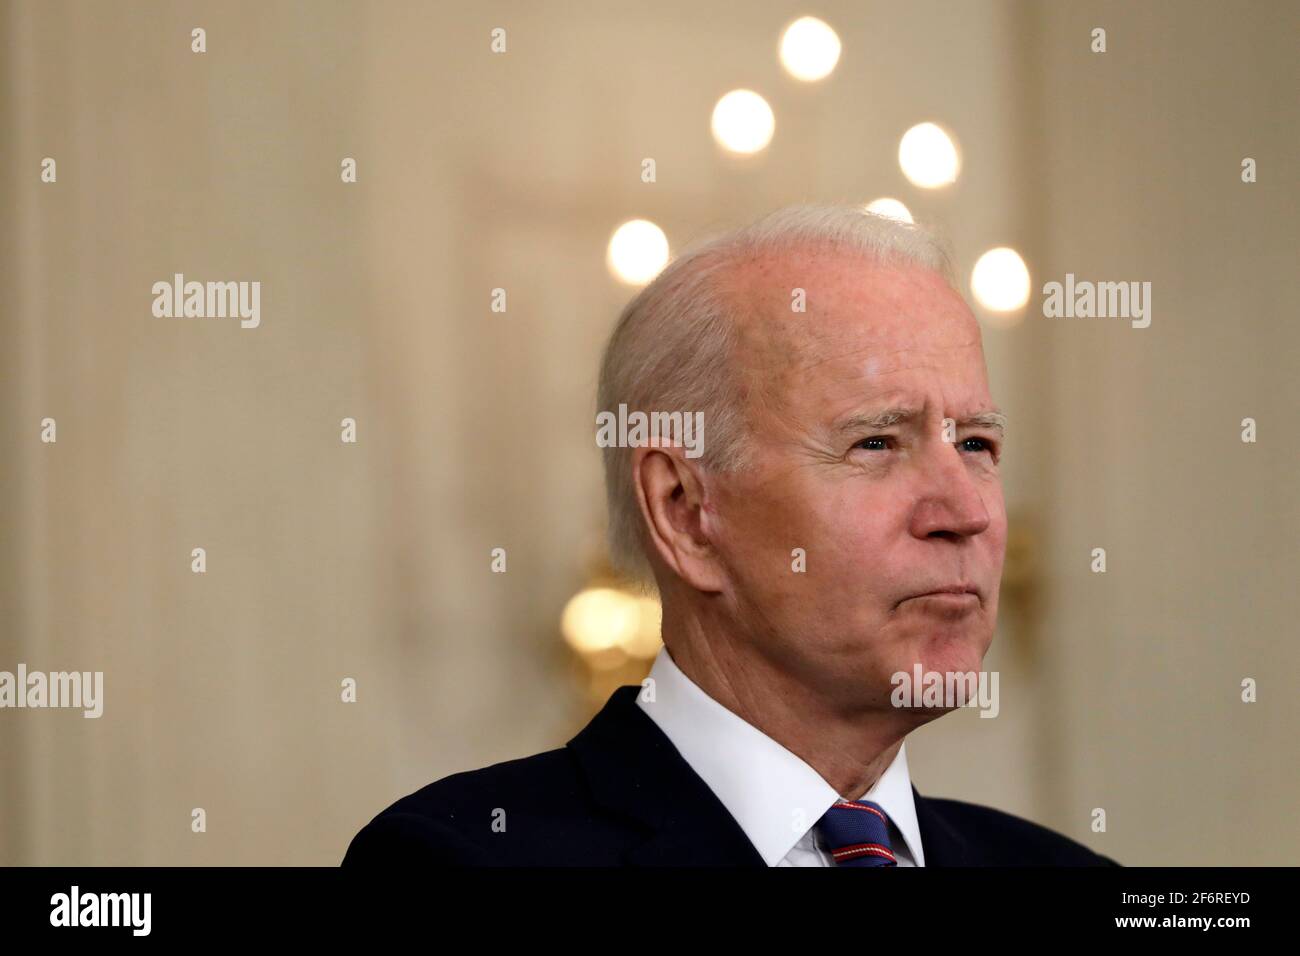 U.S. President Joe Biden delivers remarks on the March jobs report at the White House in Washington on April 2, 2021. Credit: Yuri Gripas/Pool via CNP /MediaPunch Stock Photo